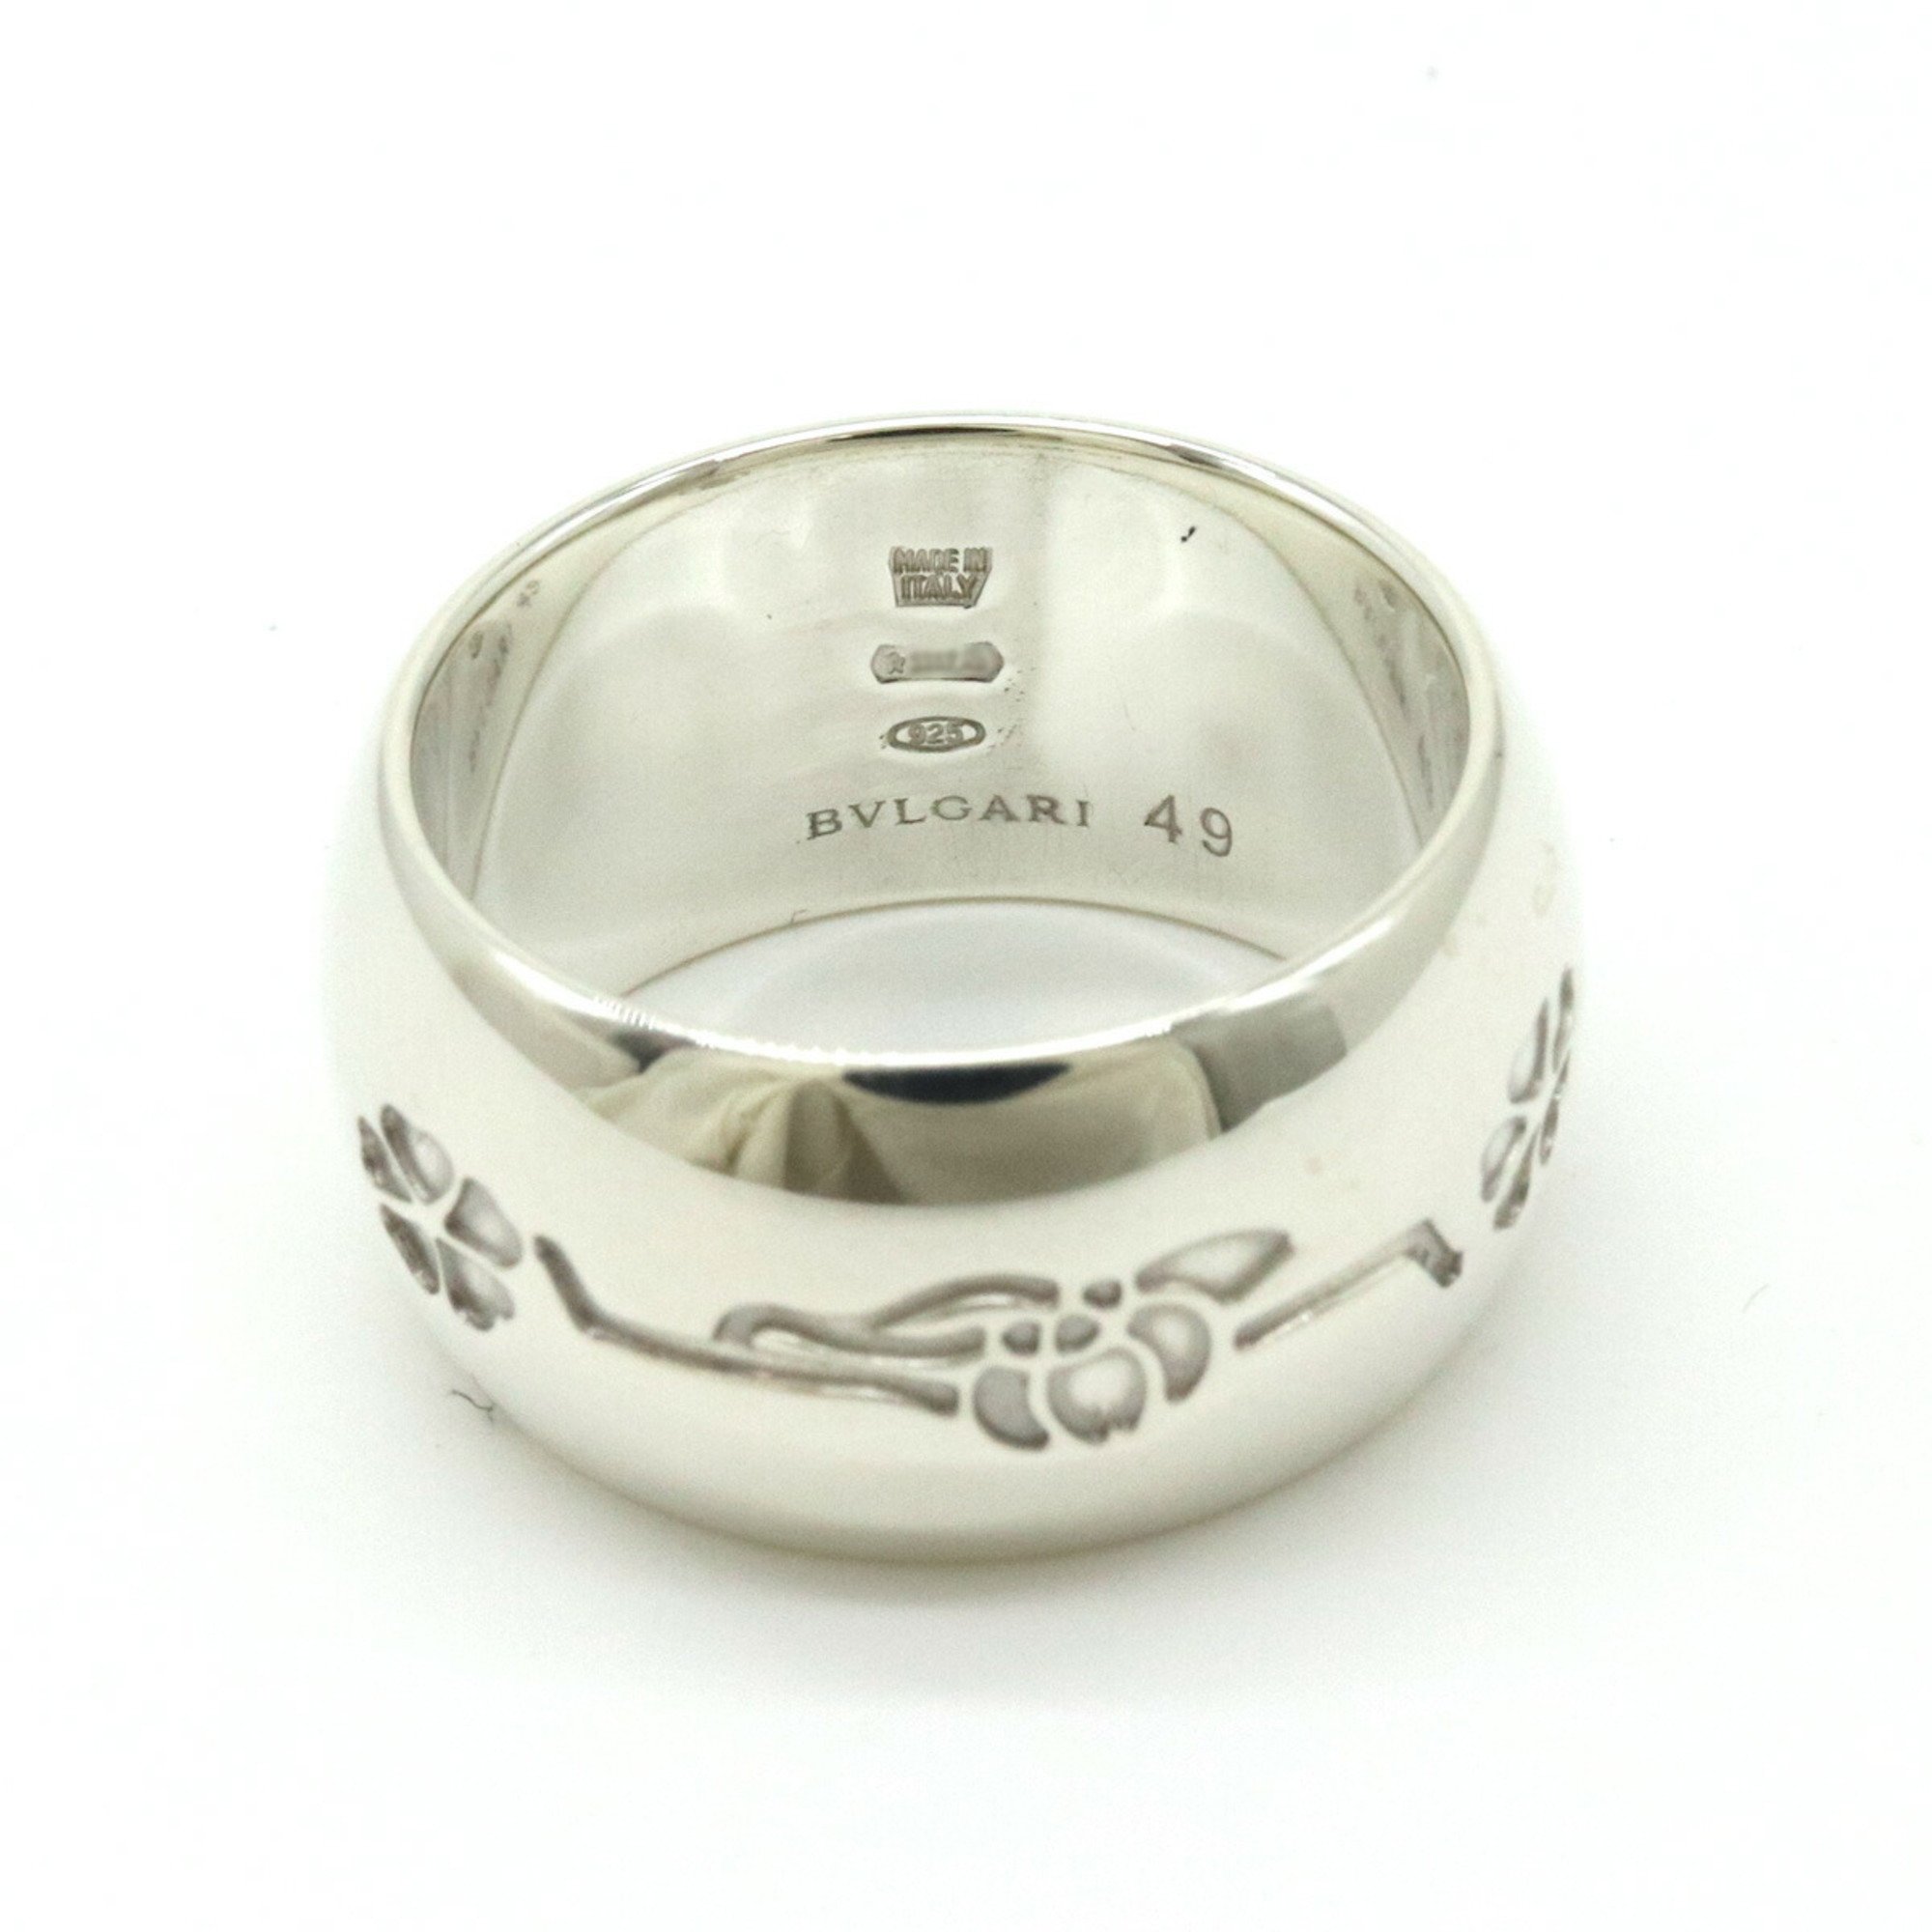 BVLGARI Save the Children Sotirio Ring Charity SV925 Silver #49 Japanese Size Approx. 10.5